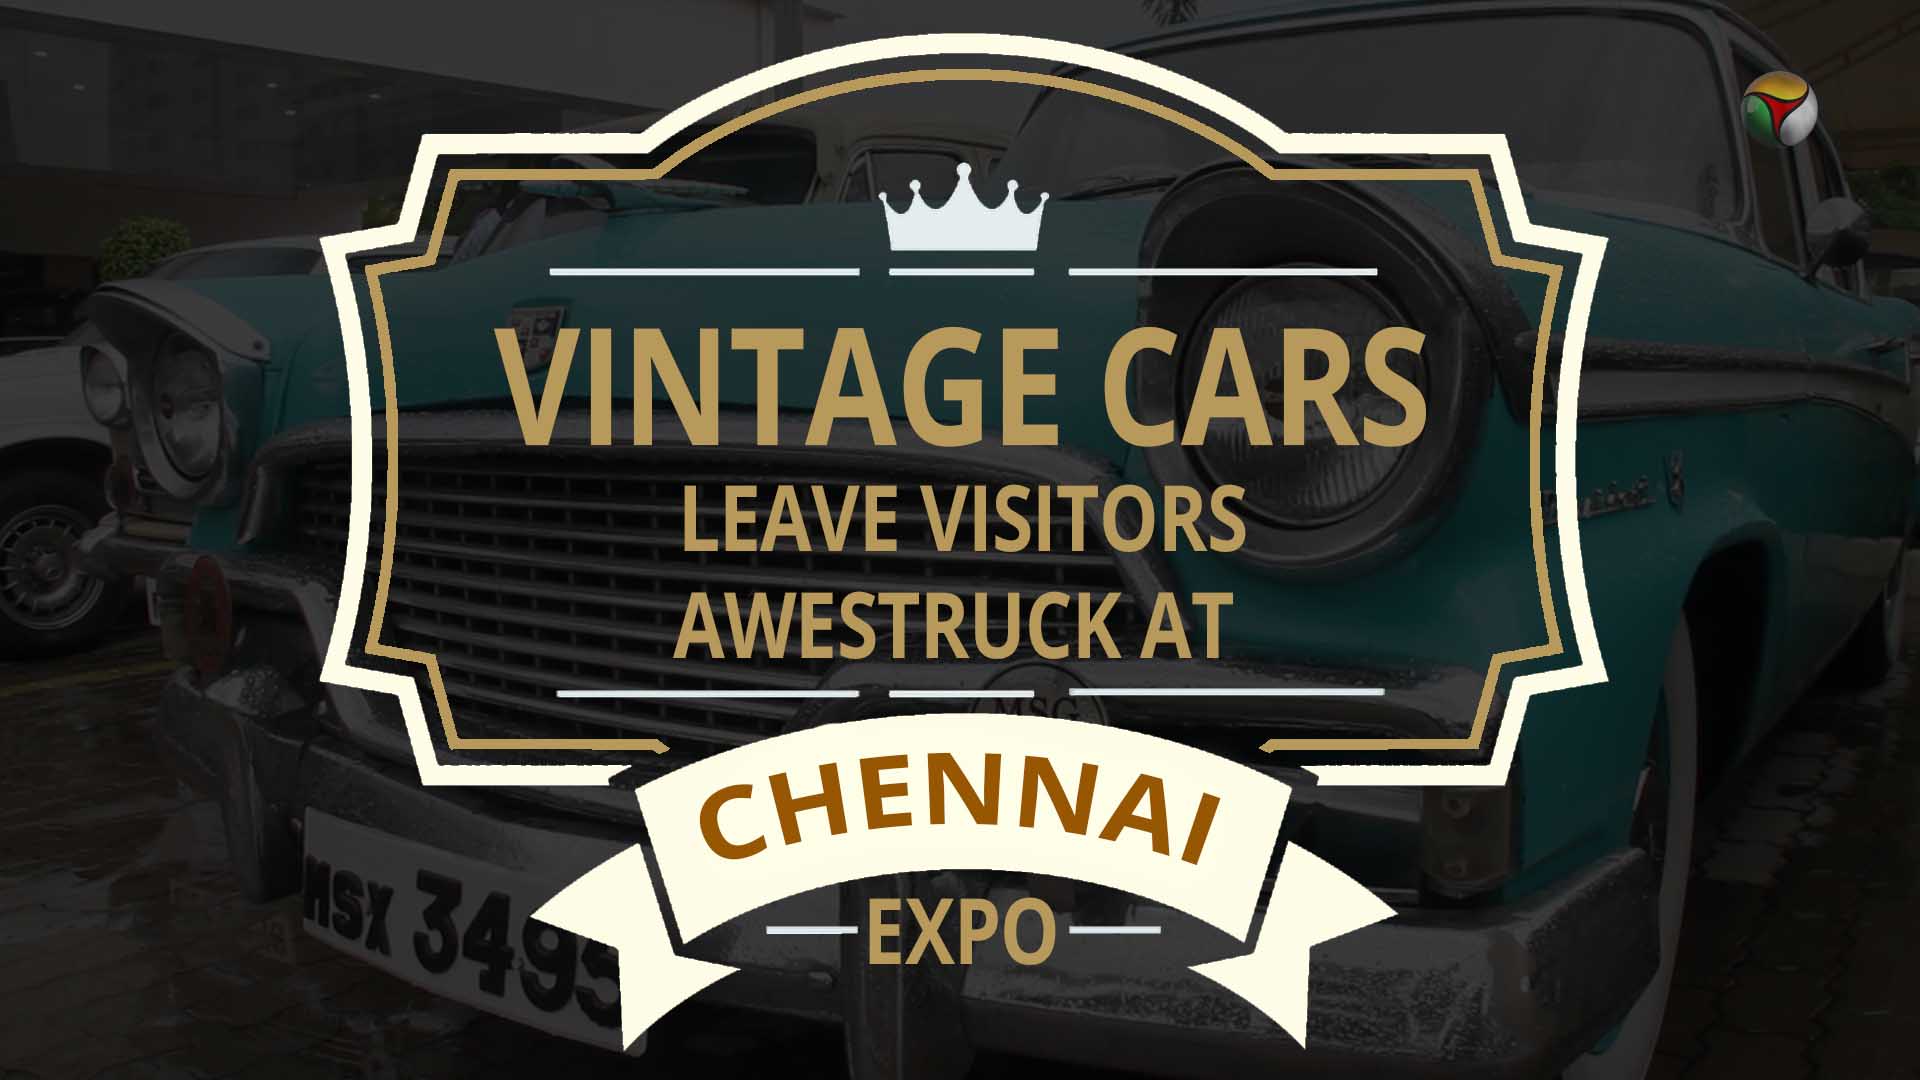 Vintage cars leave visitors awestruck at Chennai Heritage Auto show